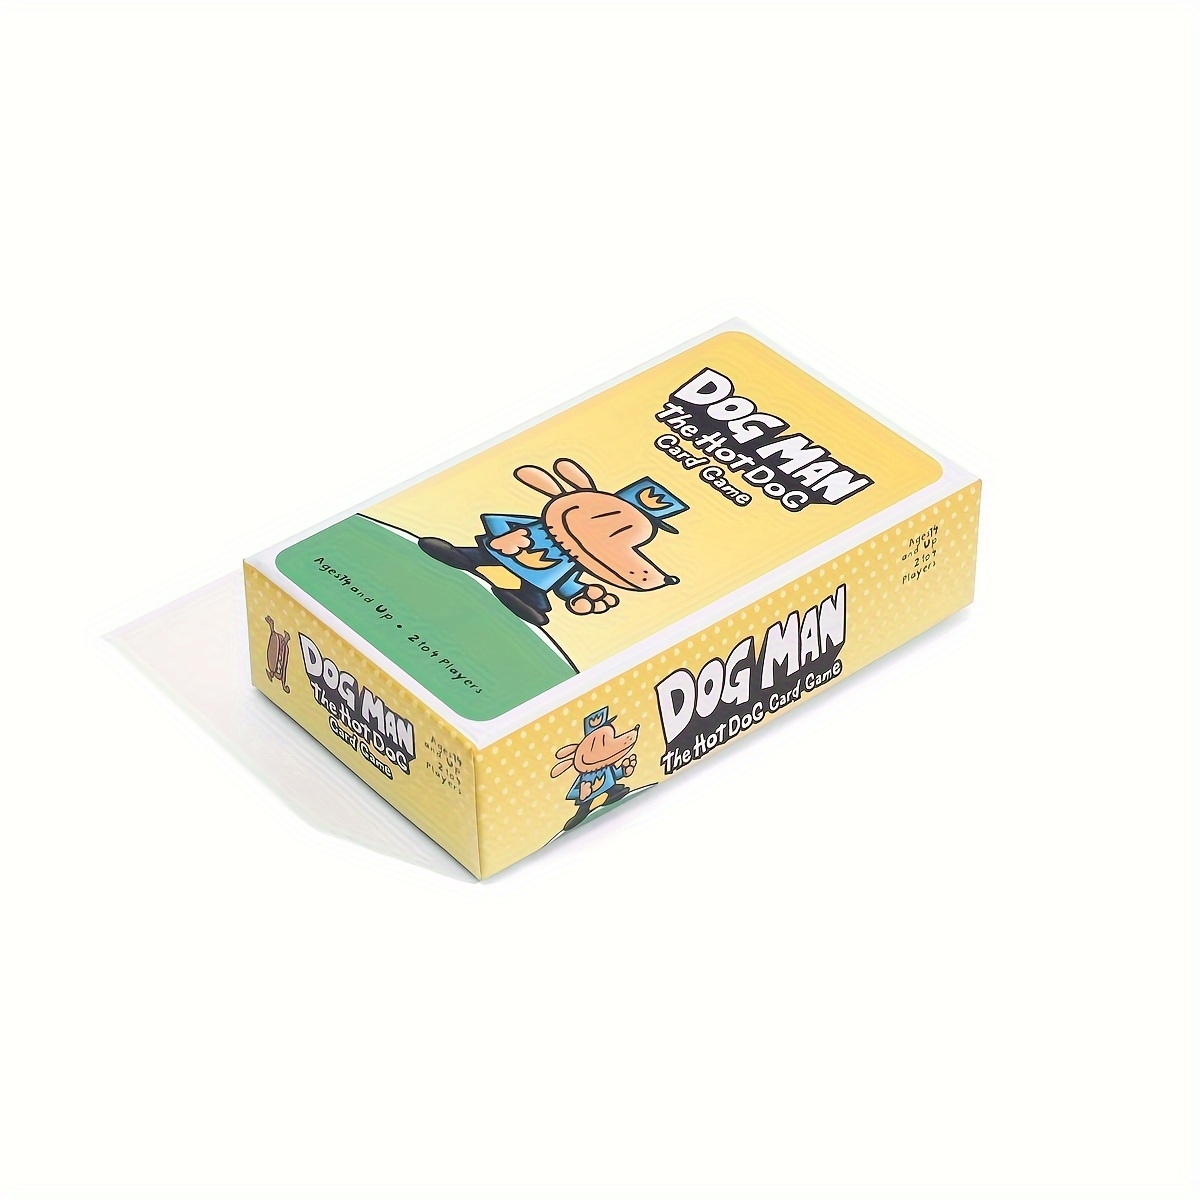 

social Strategy" Fast-paced Family Card Game - Enhances Learning, Memory & Social Skills | Fun Party Board Game For Ages 14+